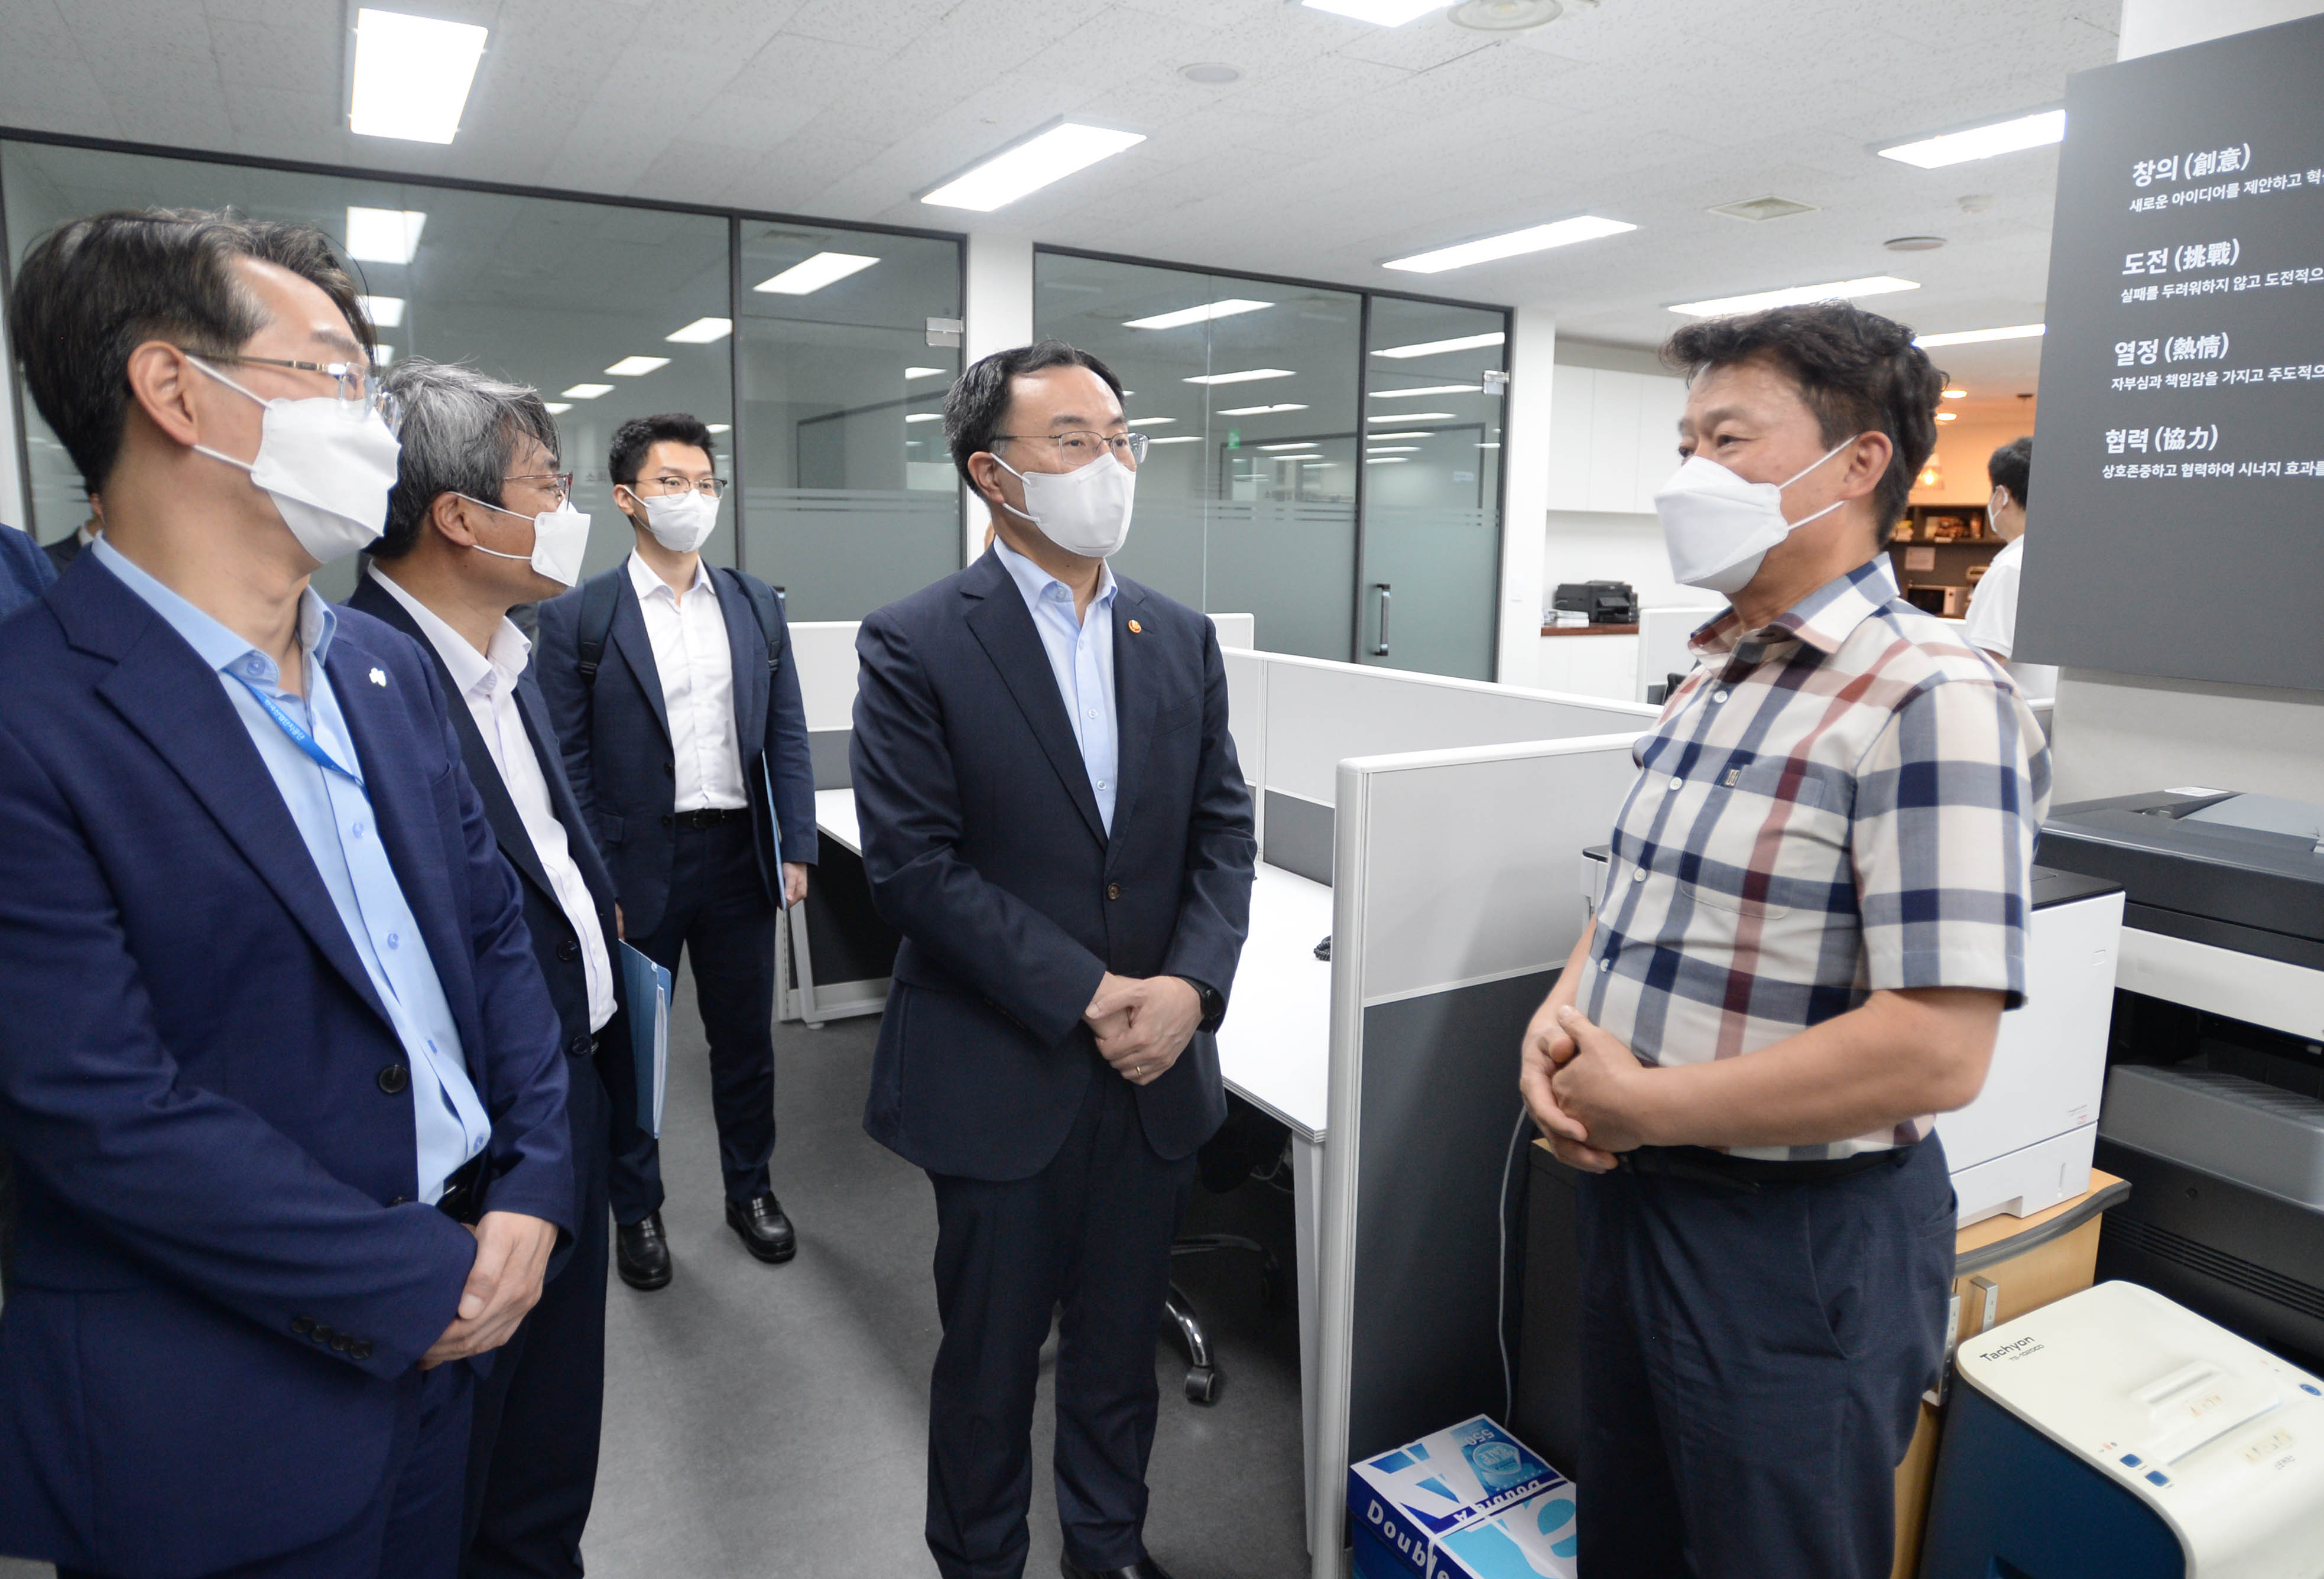 Minister Moon encourages COVID-19 precautions at industrial sites Image 0